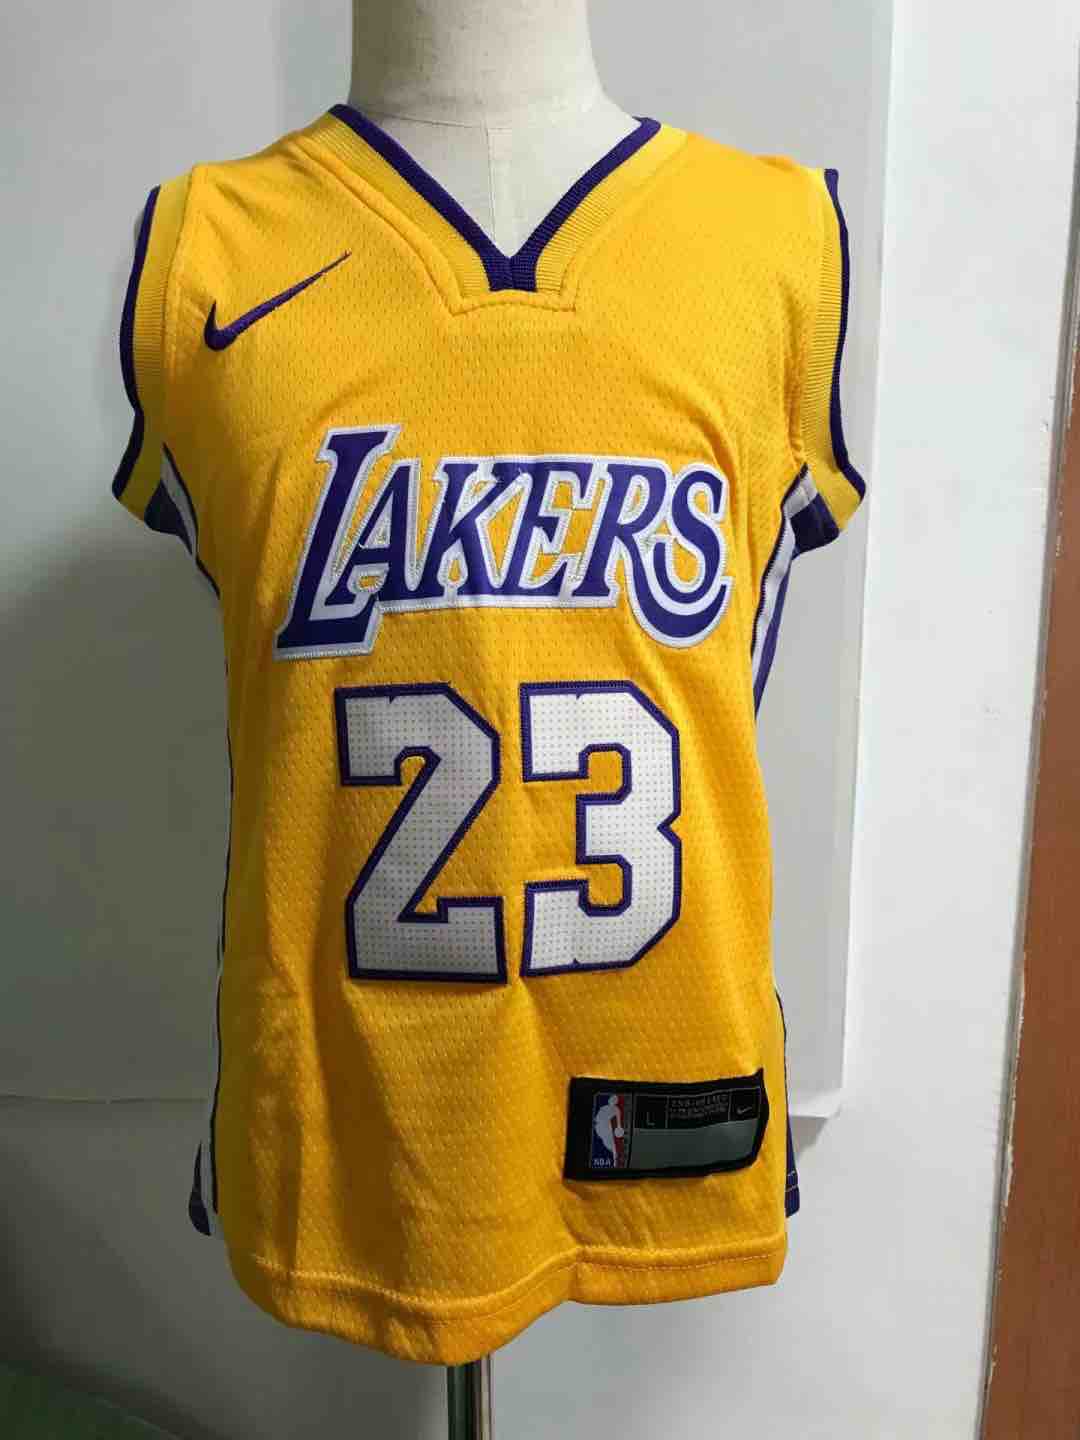 Kids NBA Los Angeles Lakers #23 James Yellow Jersey 2-5T